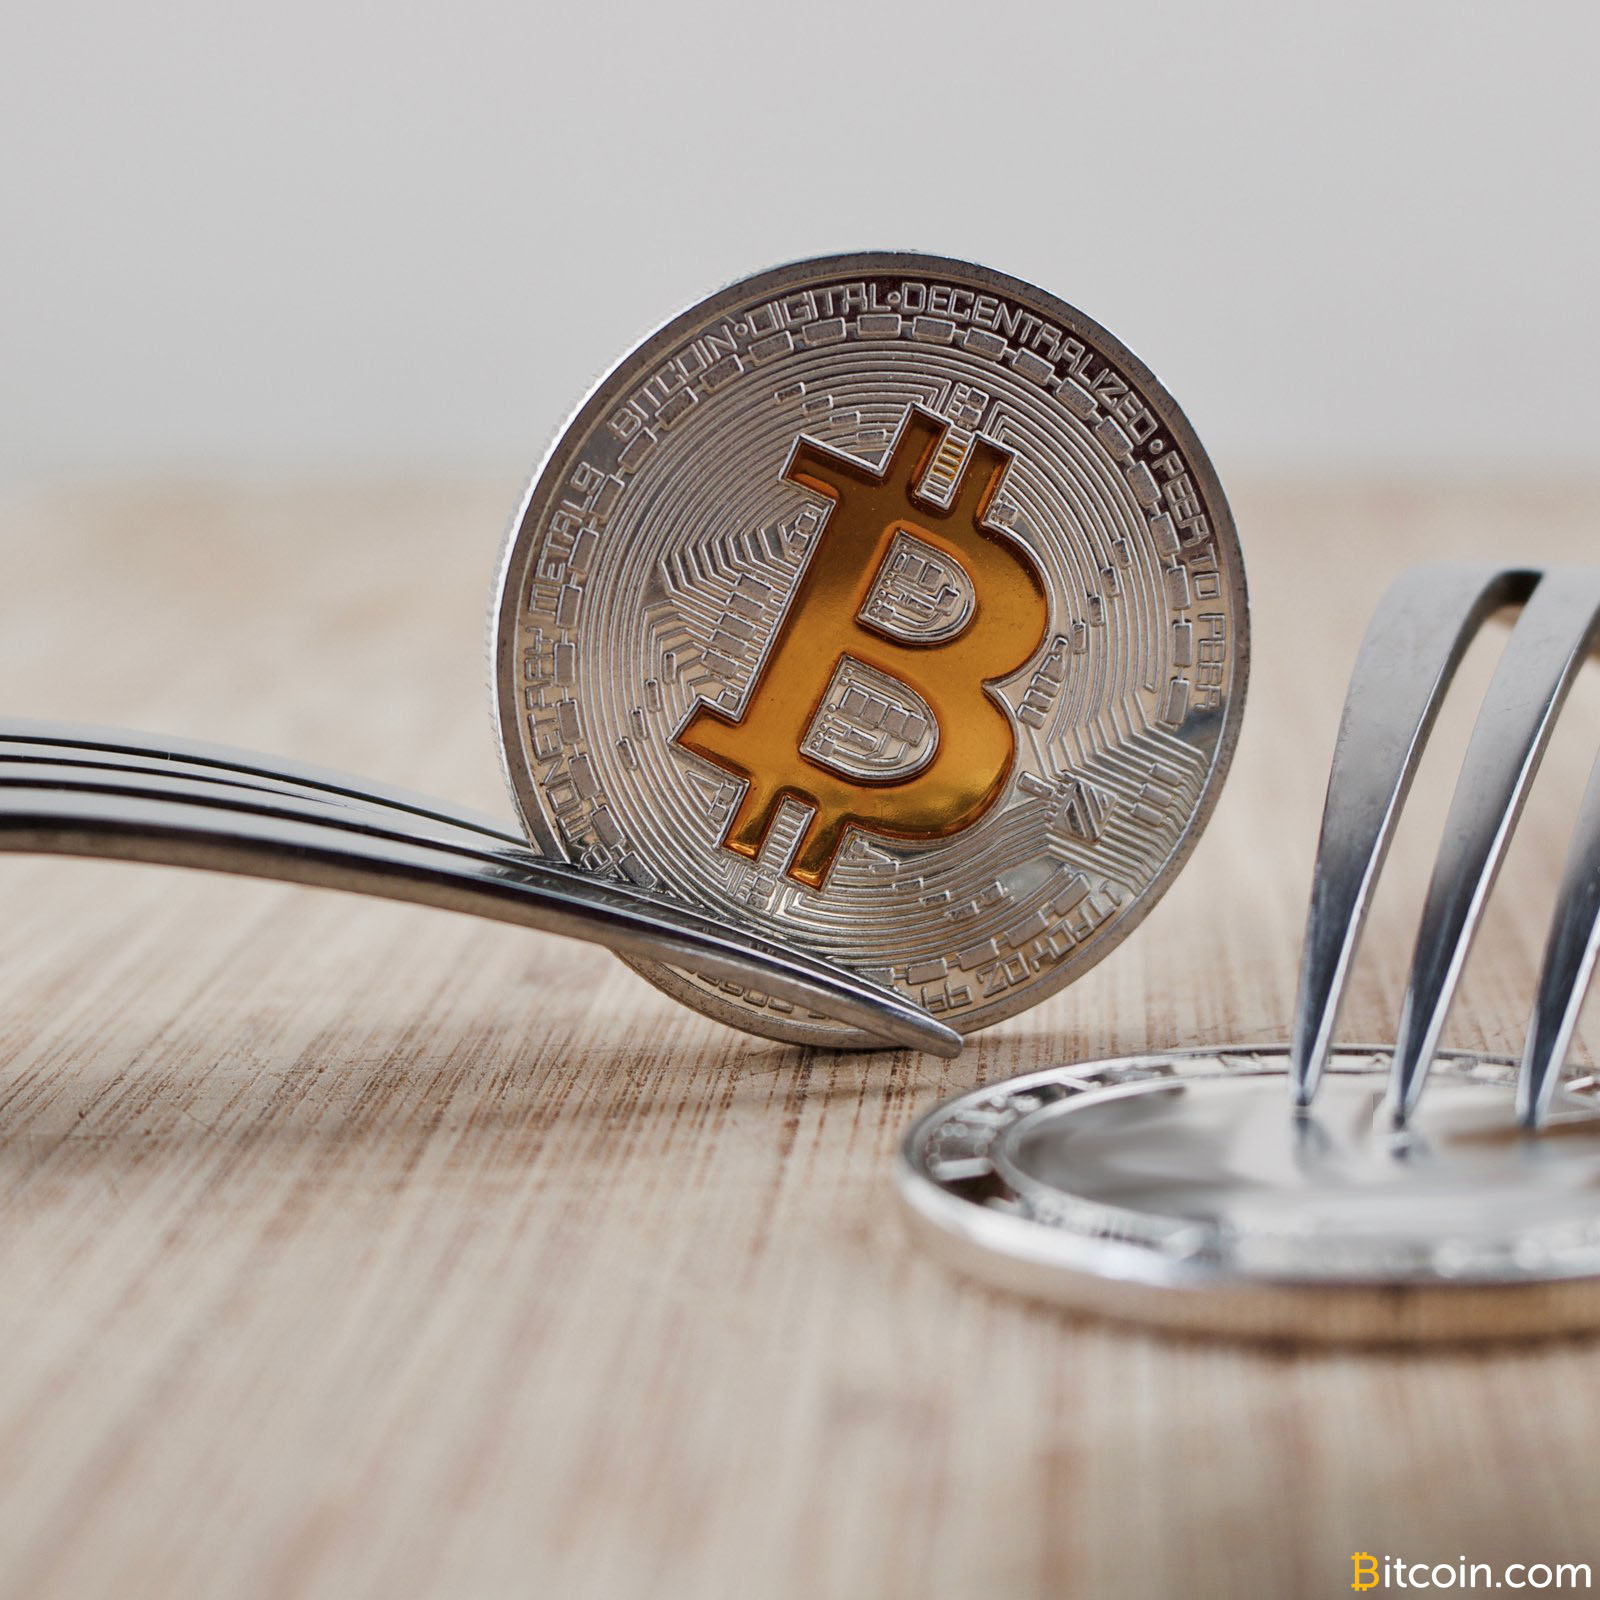 Here’s Bitcoin.com's Updated Stance on Specific Bitcoin Chain Symbols and Monikers